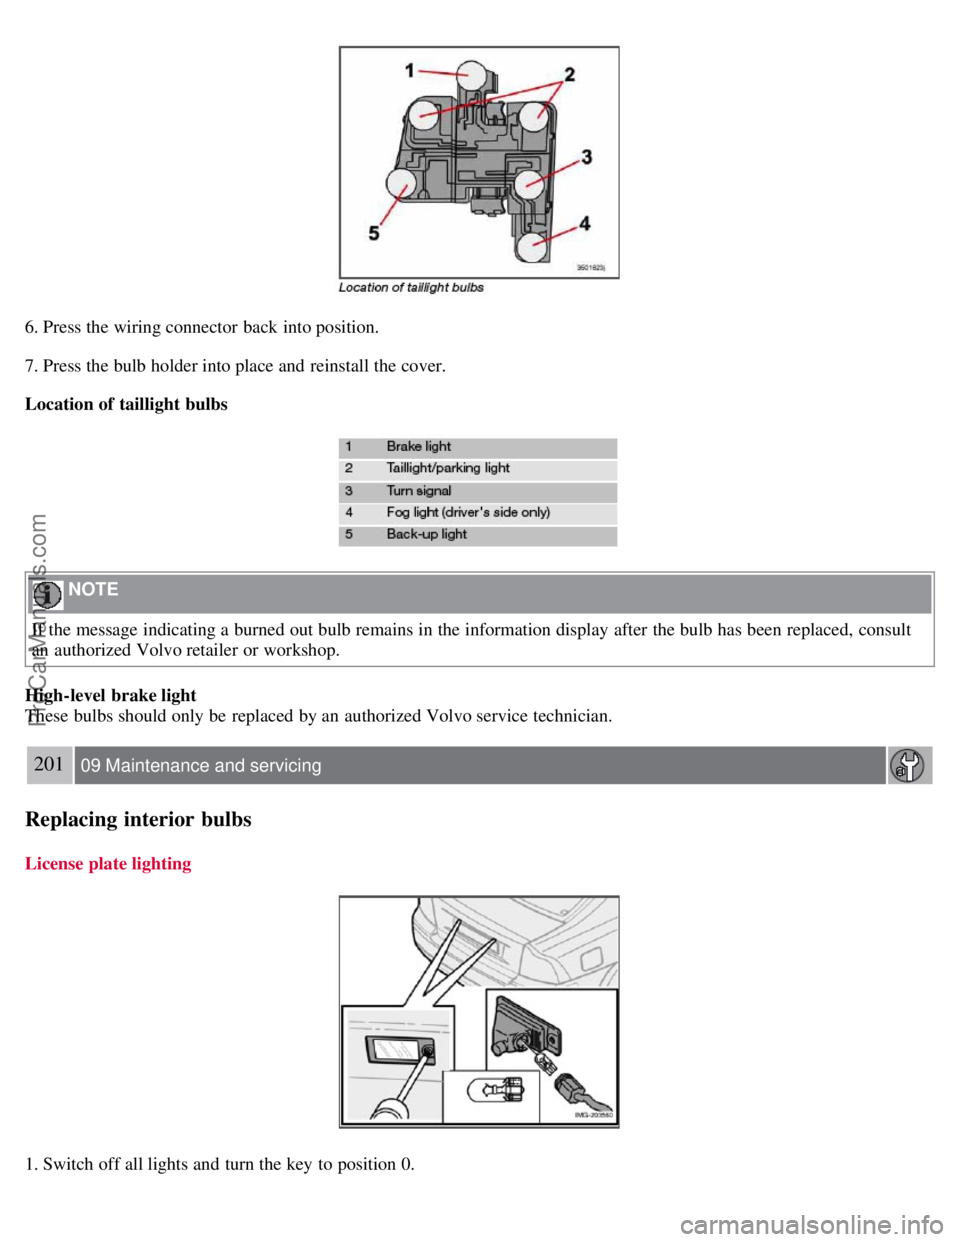 VOLVO S40 2007 Owners Manual 6. Press the wiring connector  back into position.
7. Press the bulb holder into place and  reinstall the cover.
Location of taillight bulbs
 NOTE 
If the message indicating a  burned out bulb remains